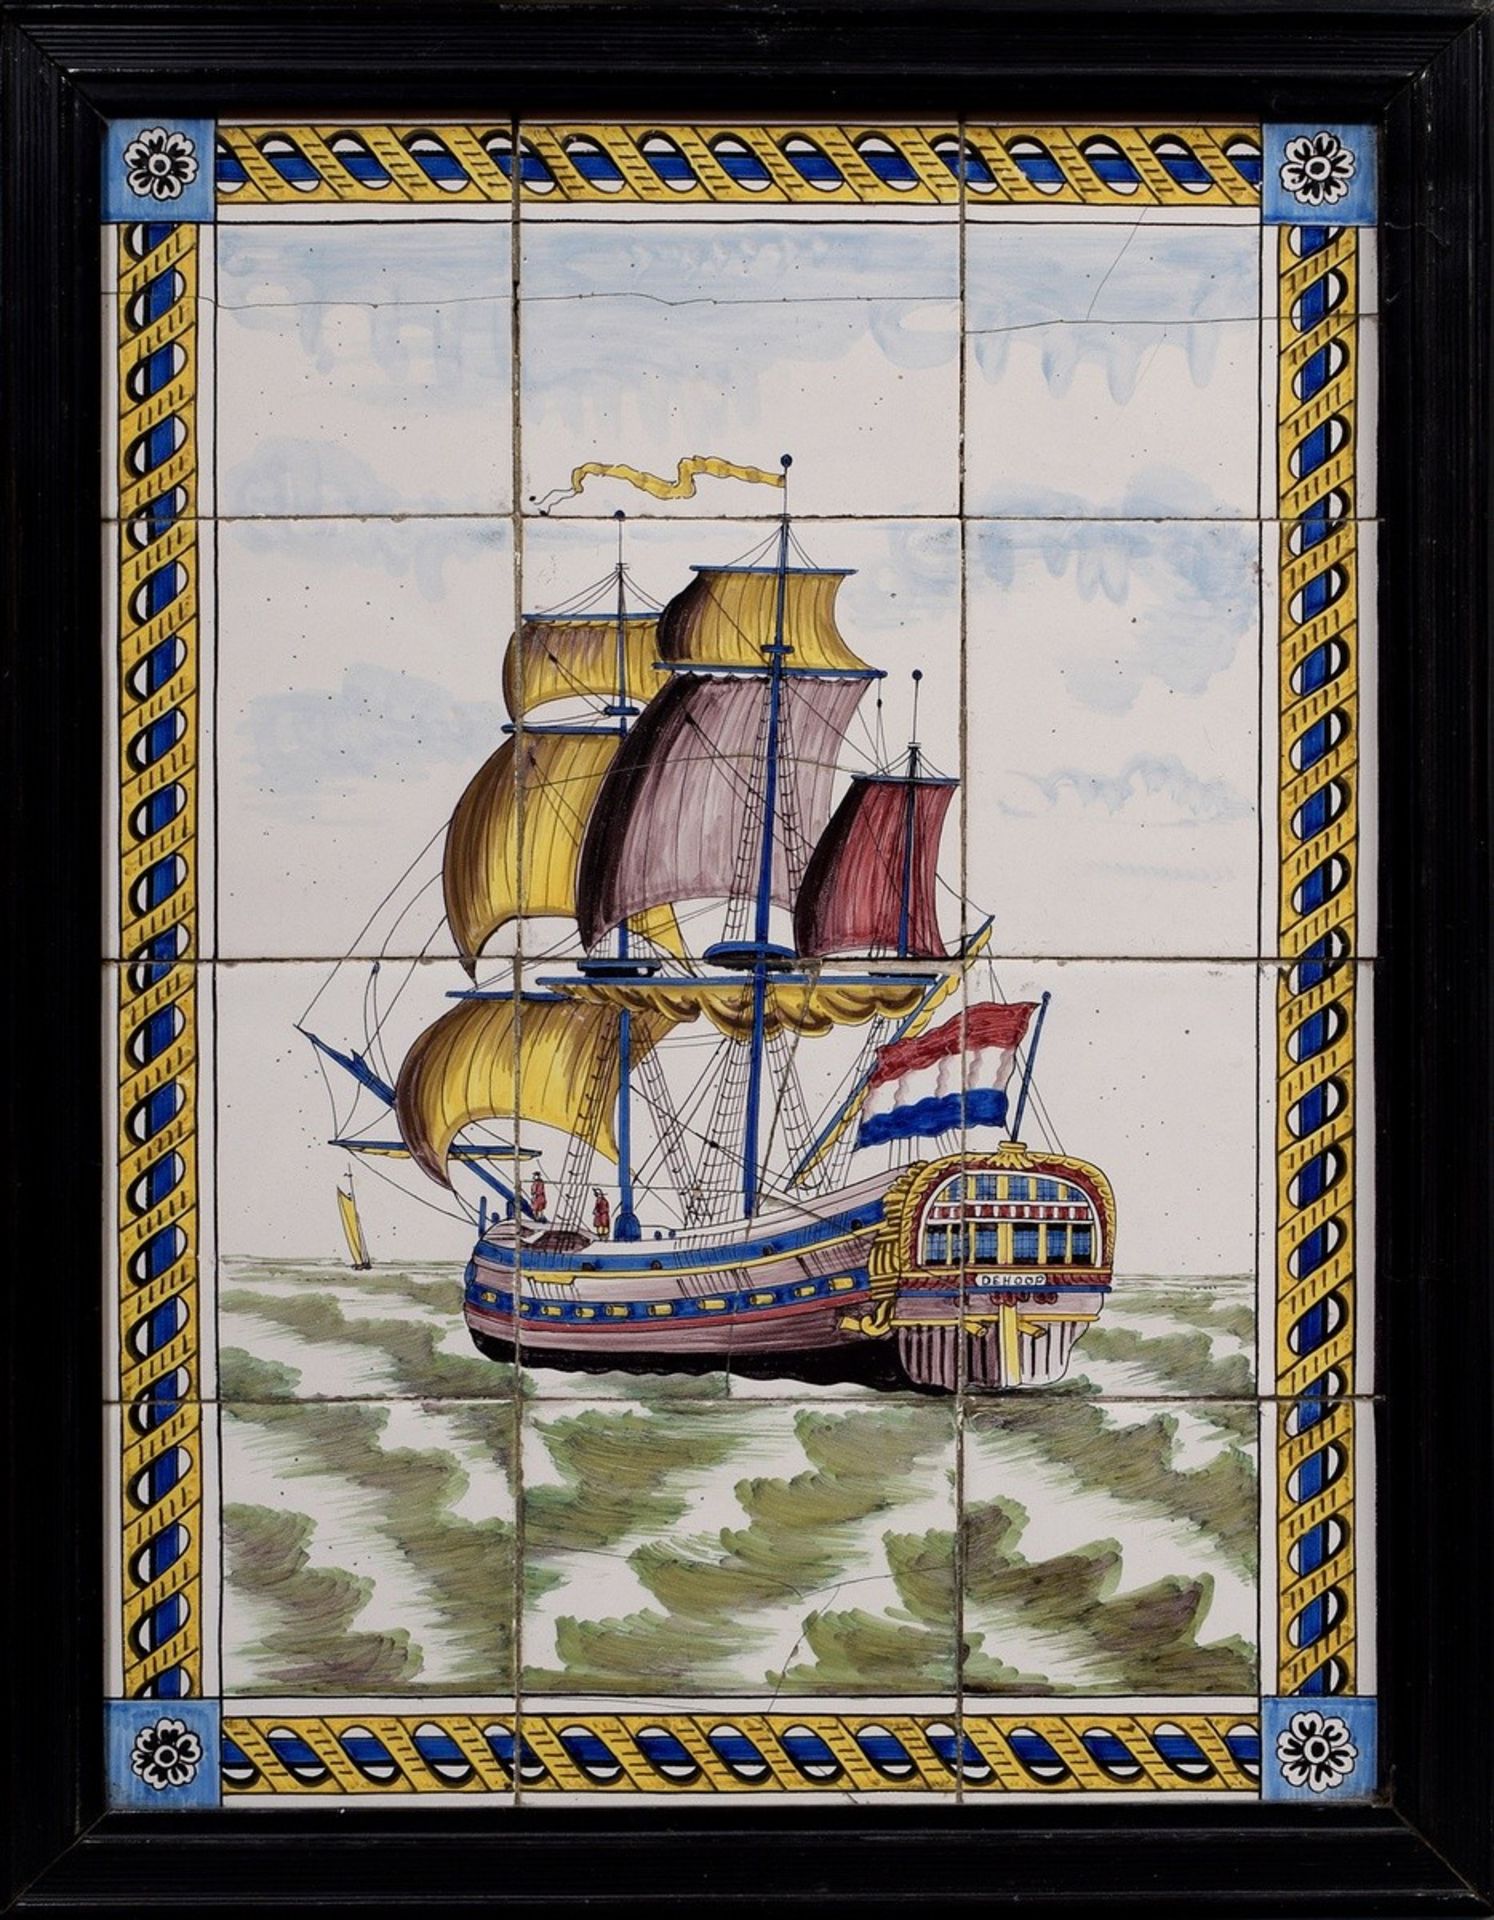 Dutch tile picture in polychrome painting " Two-master 'De Hoop'", 19th century, 52,3x40,3cm (m.R. 